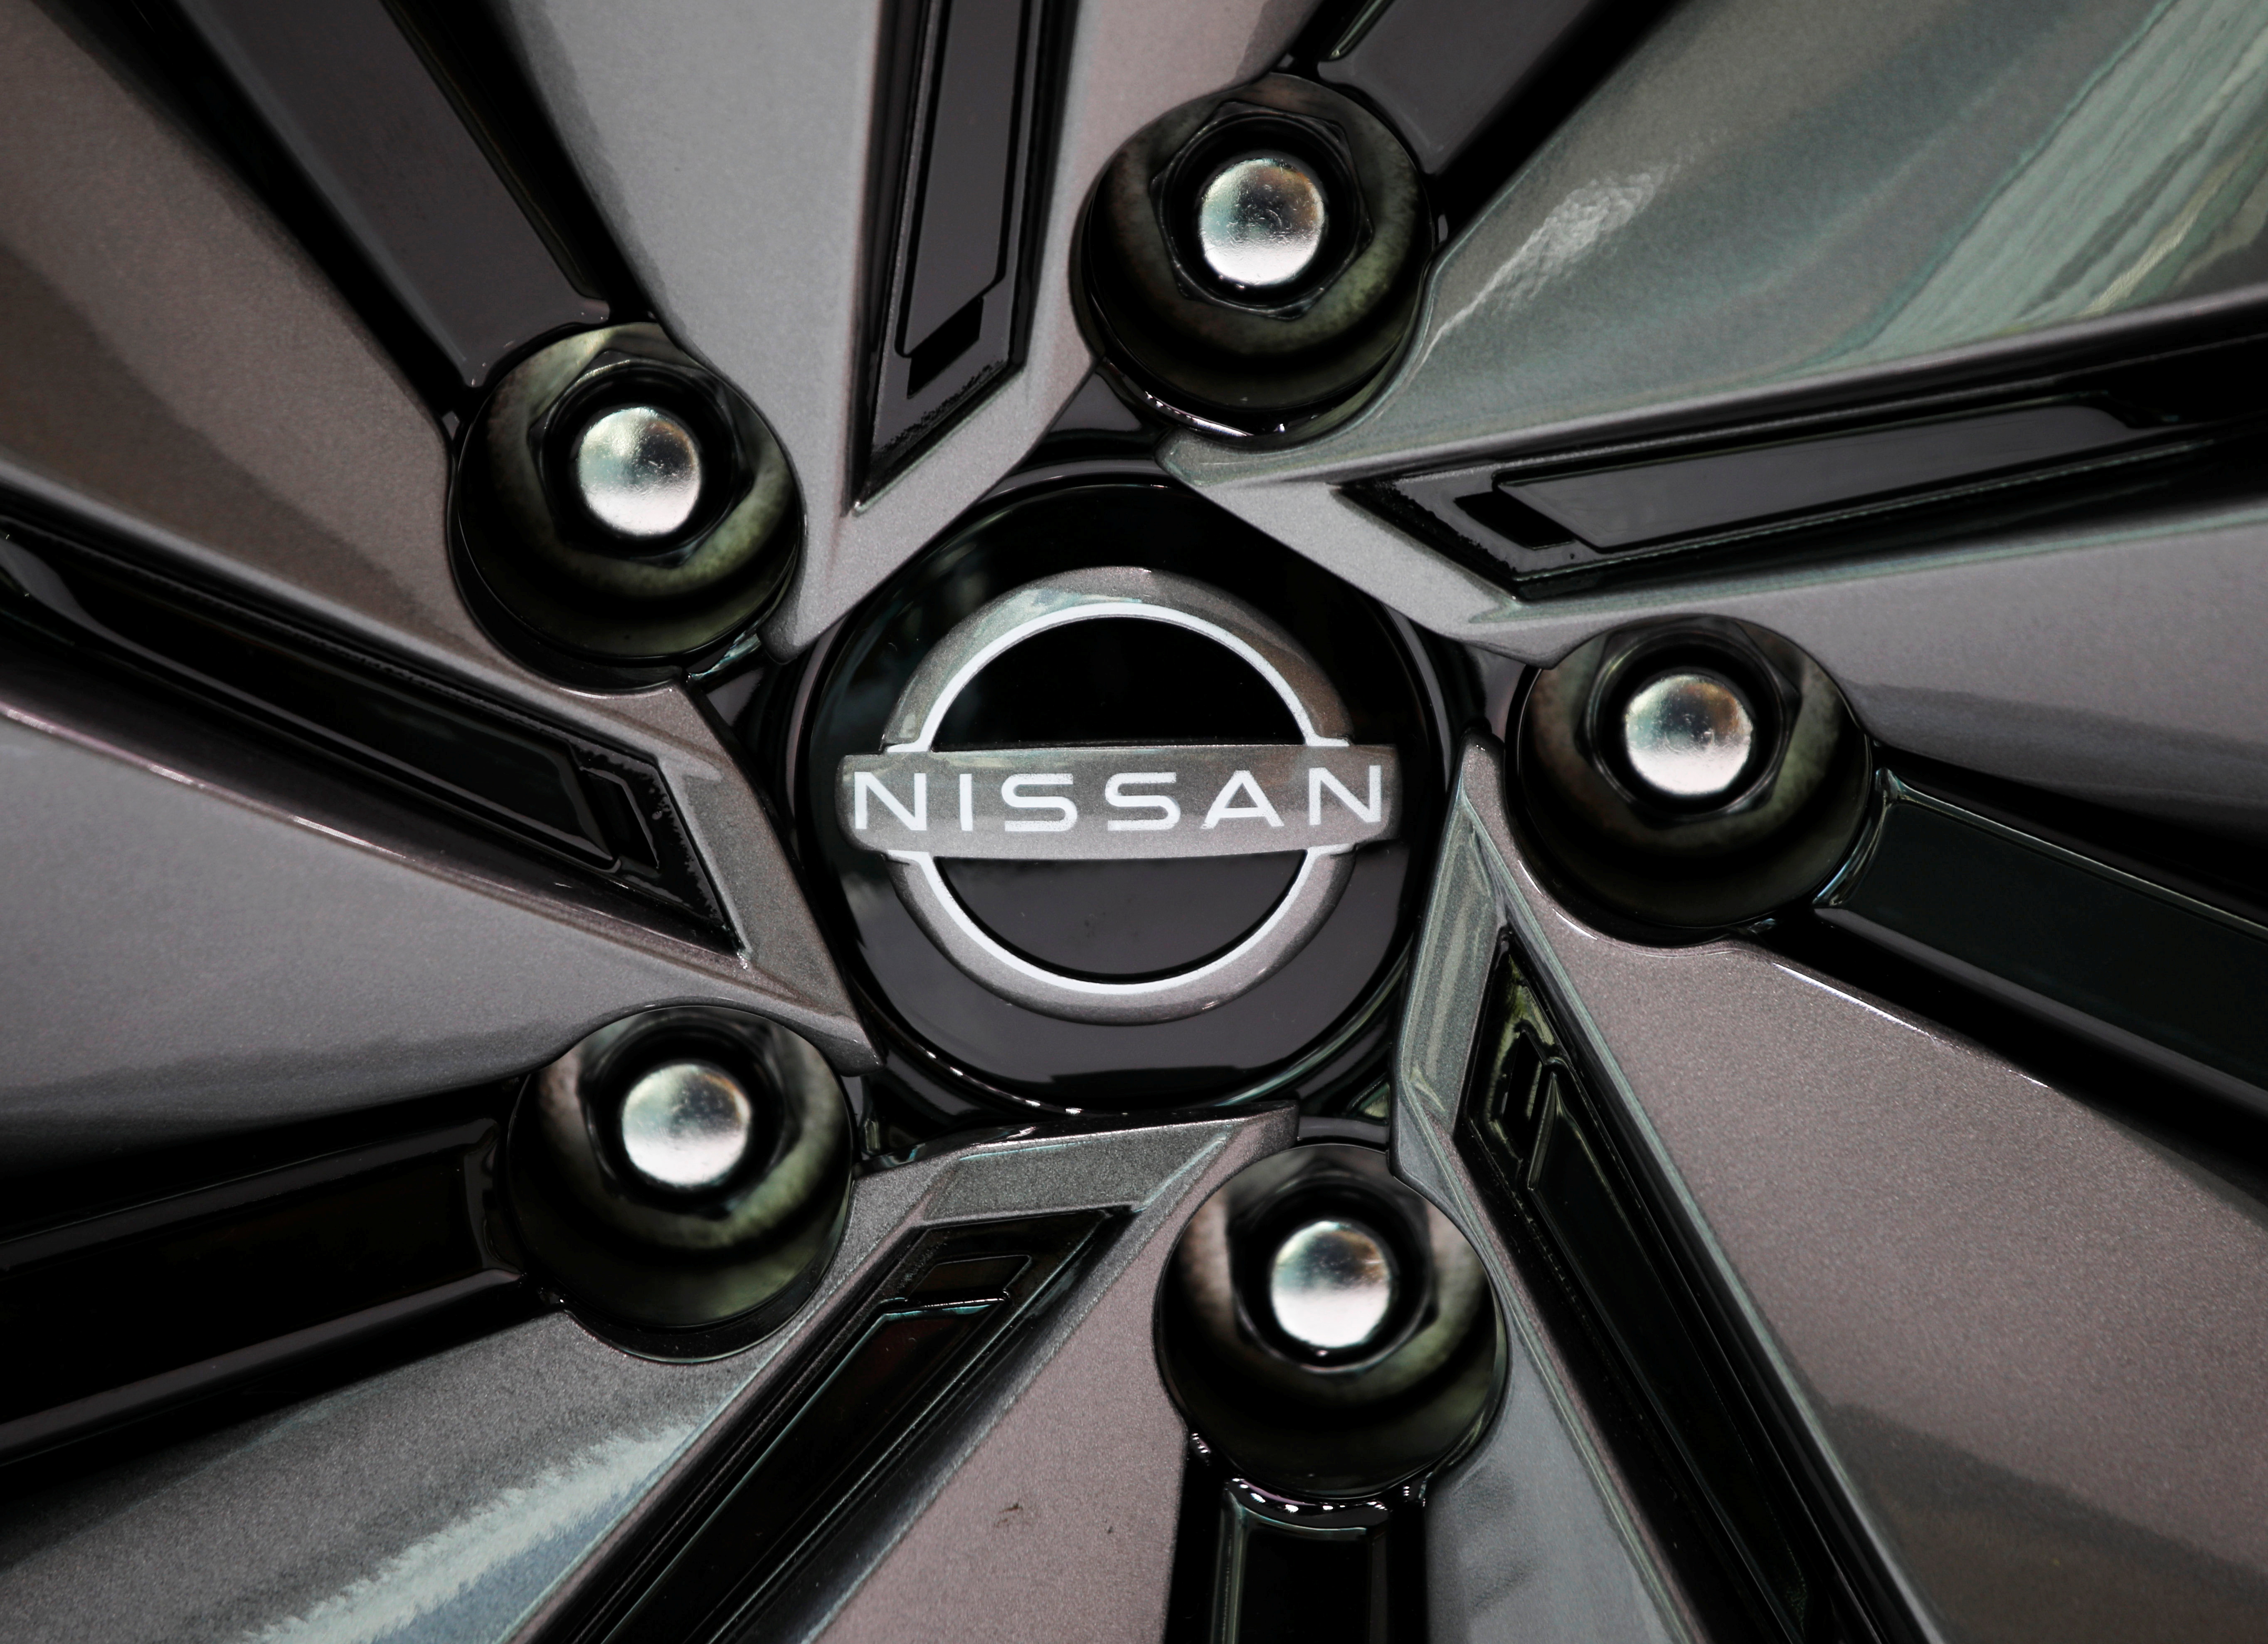 The brand logo of Nissan Motor Corp. is seen on a tyre wheel of the company's car at their showroom in Tokyo